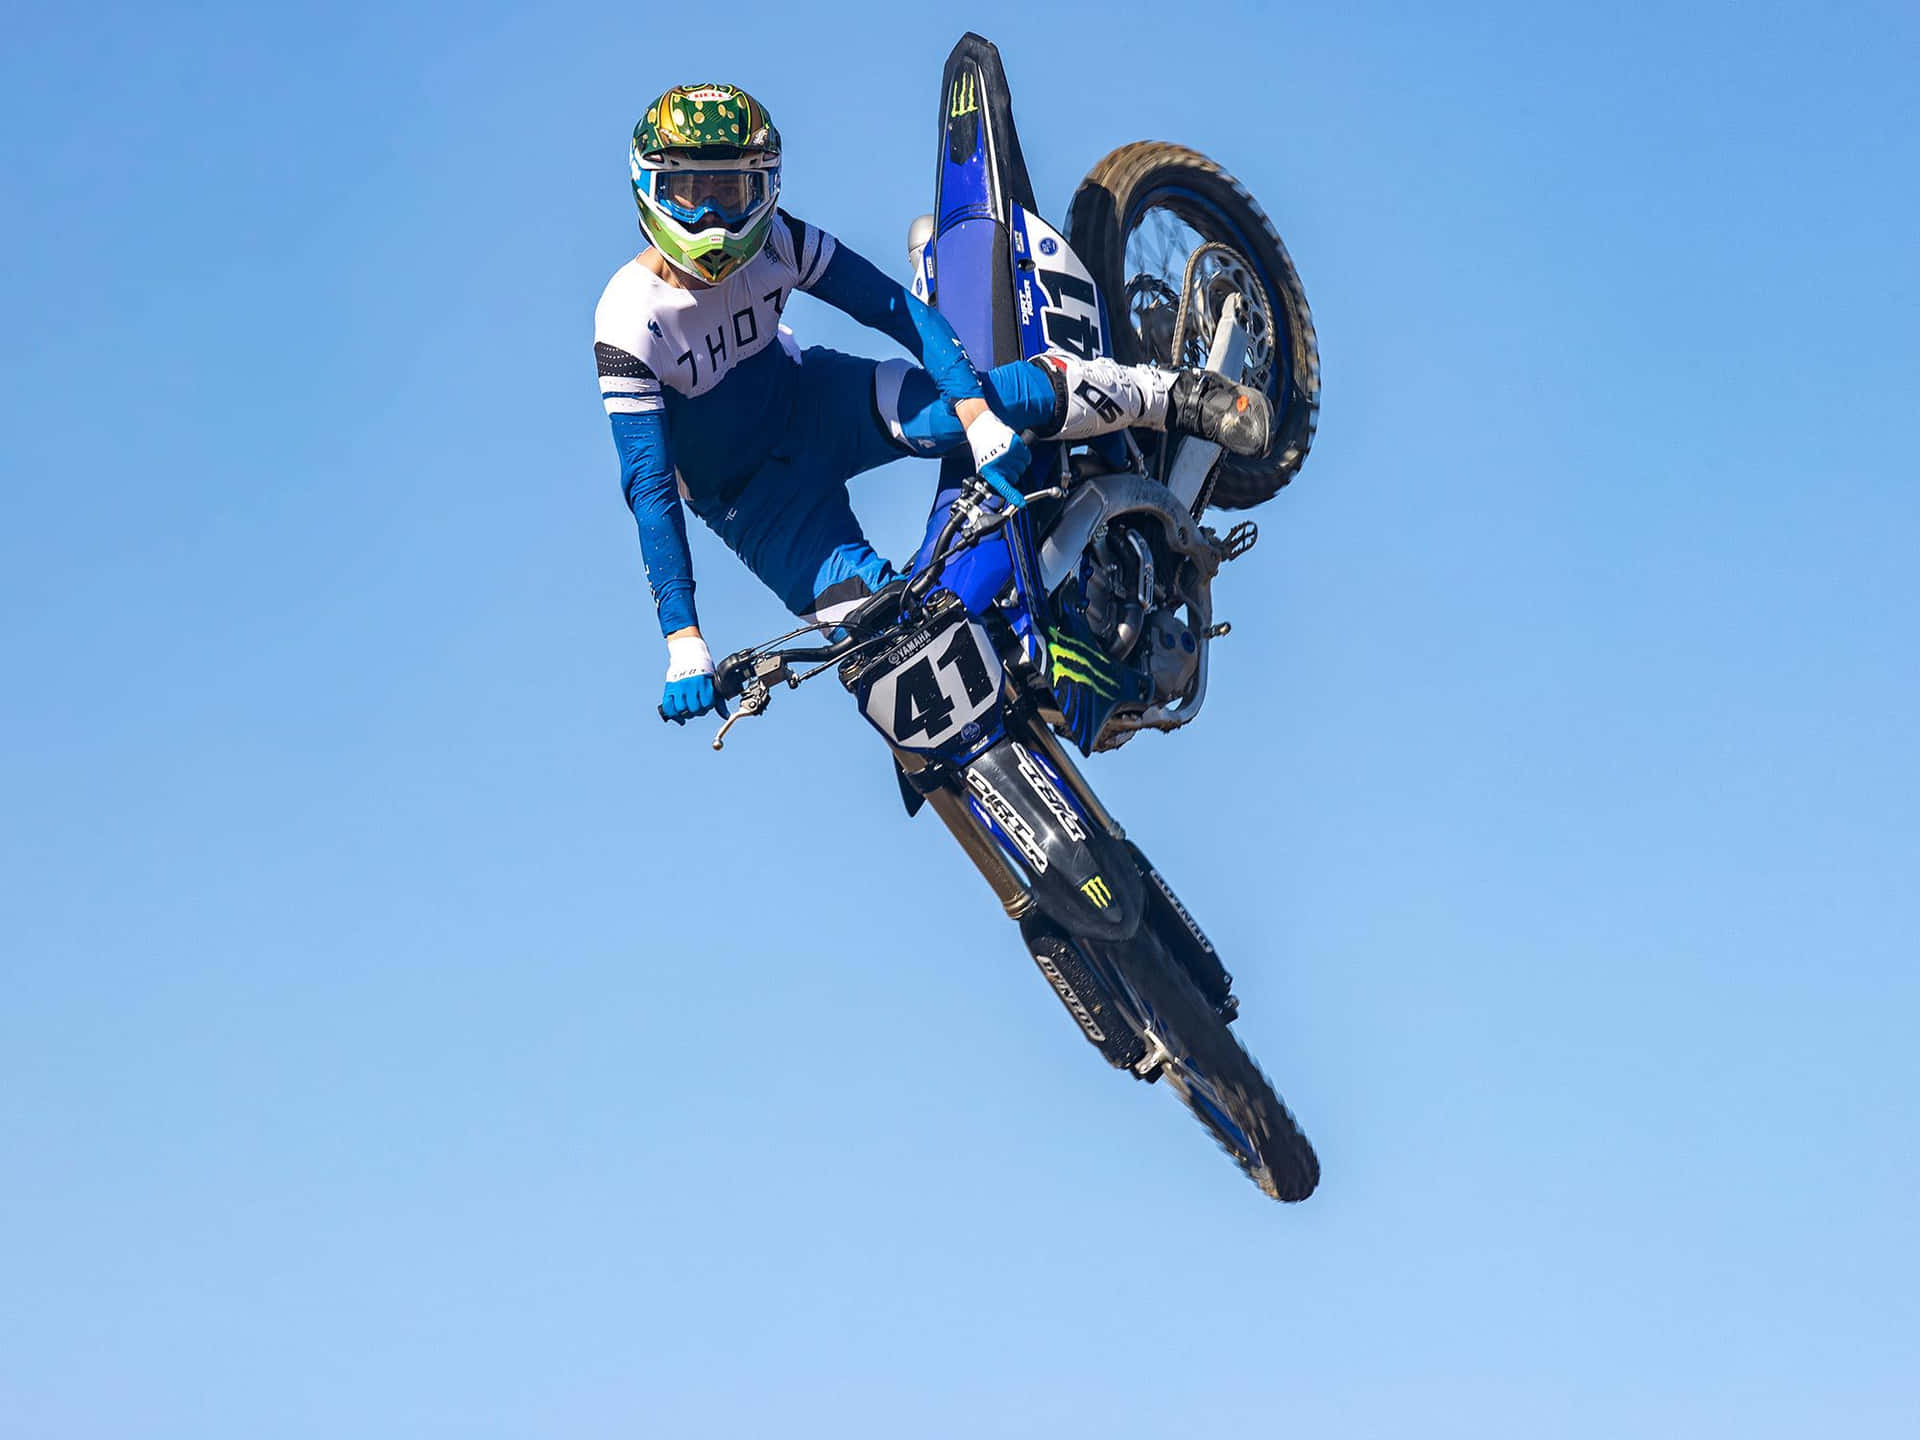 A thrilling dirt bike jump in action